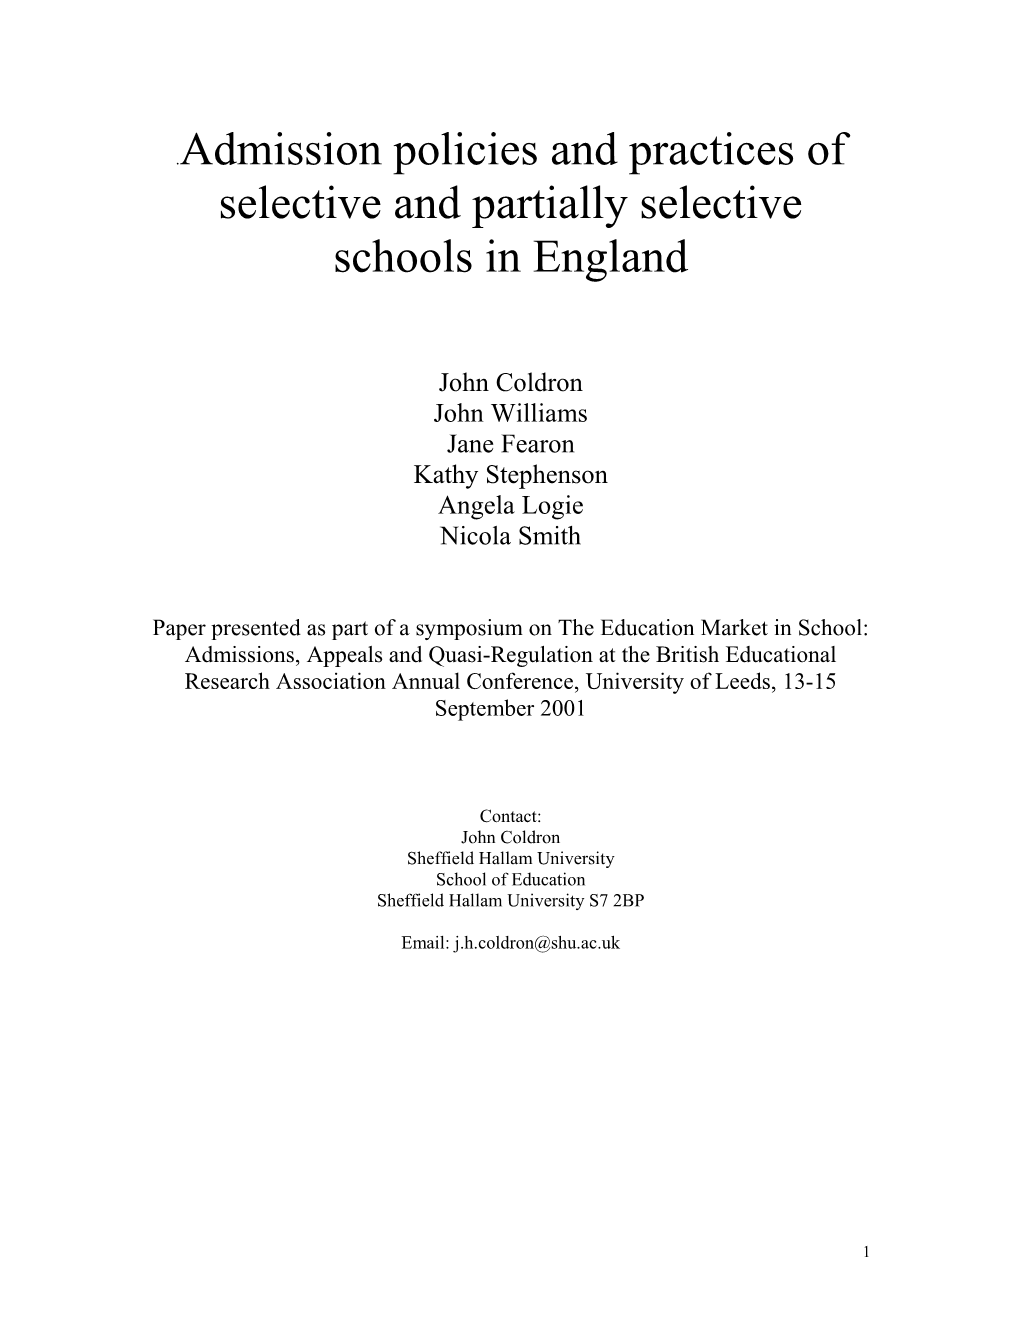 Admission Policies and Practices of Selective and Partially Selective Schools in England